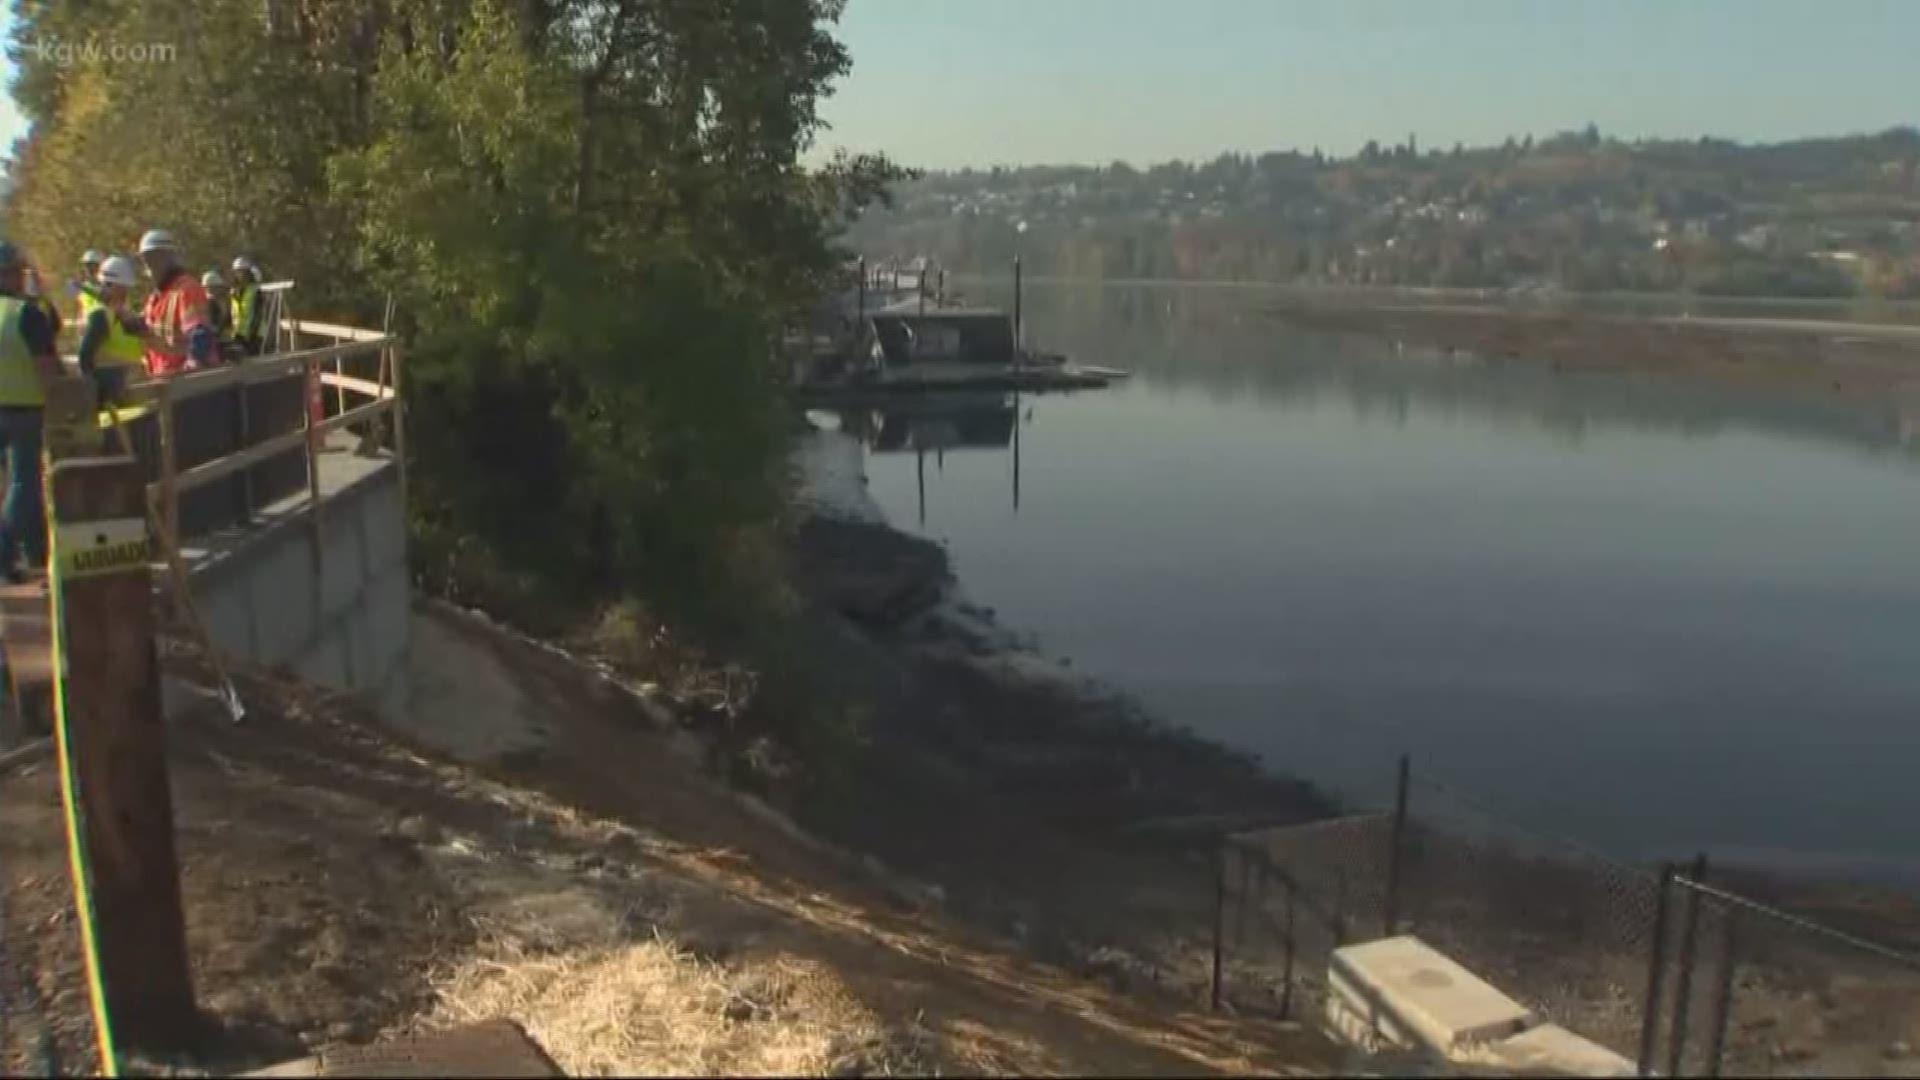 Part of the Springwater Corridor that's been closed for several months will reopen on November 1.